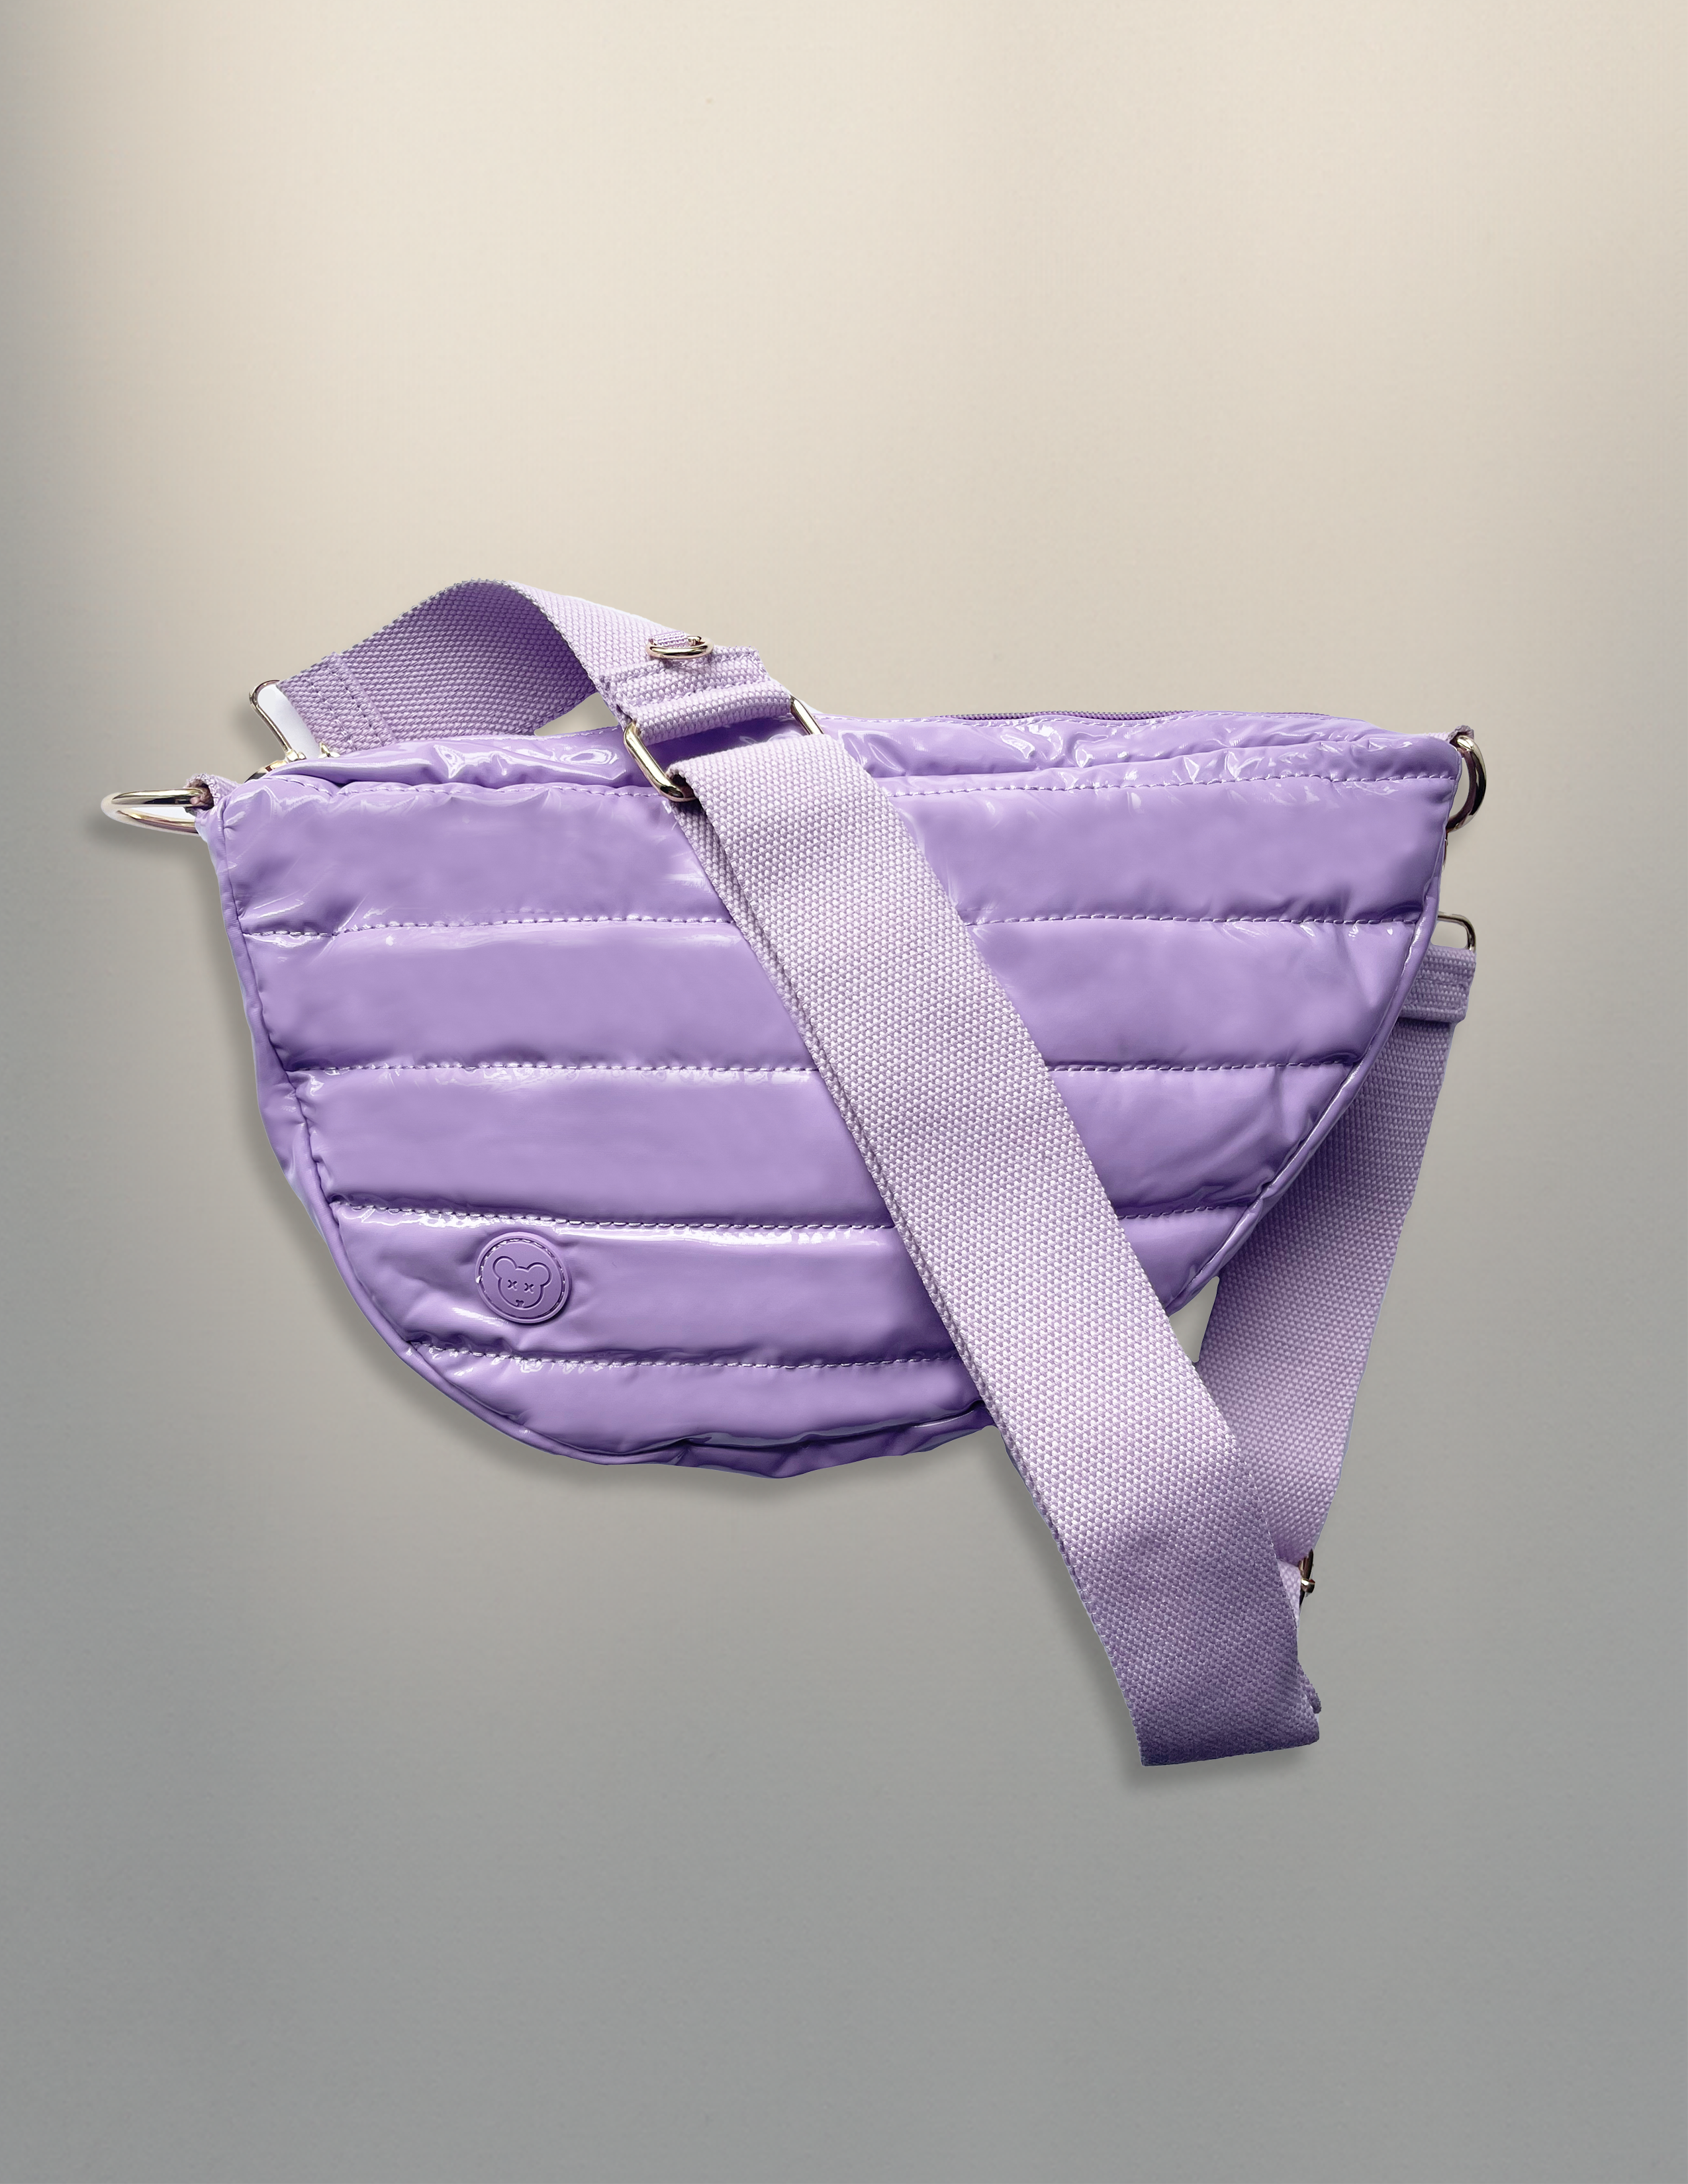 multifunctional sling diaper bag
- LAVENDER PUFF (limited edition)